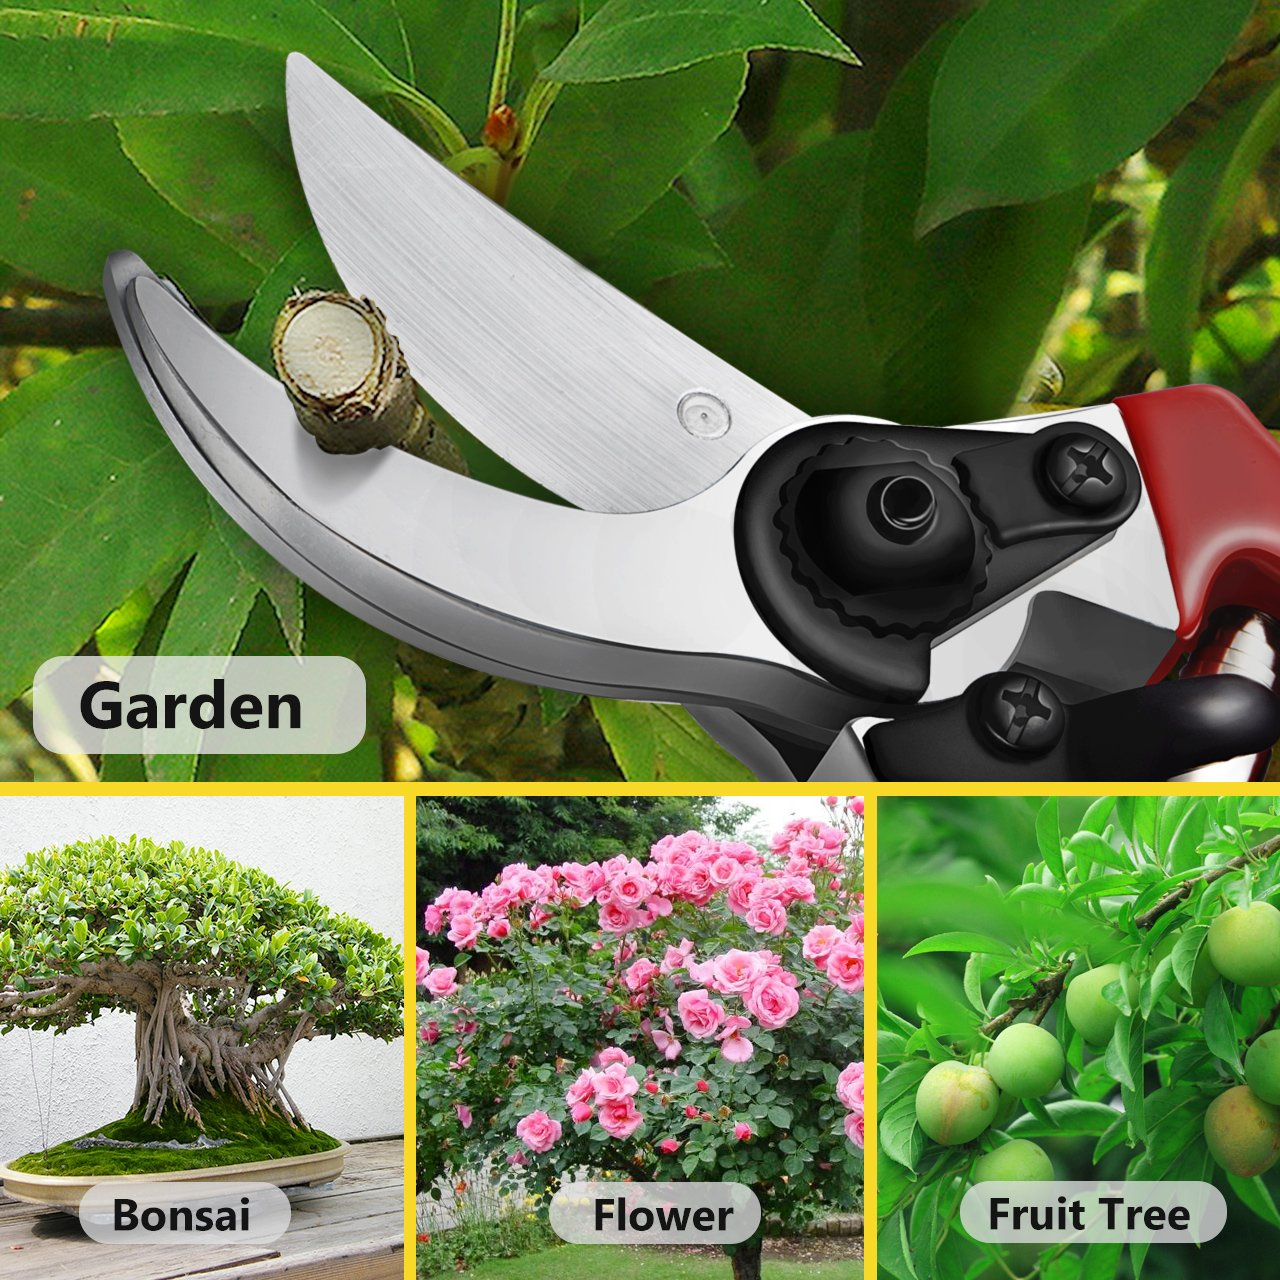  GROWNEER Bypass Pruning Shears, 8 Inch Teflon Coated Plant  Scissors, Hand Pruners for Gardening, Garden Clippers Handheld, Hedge  Trimmers with Sap Groove and Lanyard for Branch, Flower, Bonsai : Patio